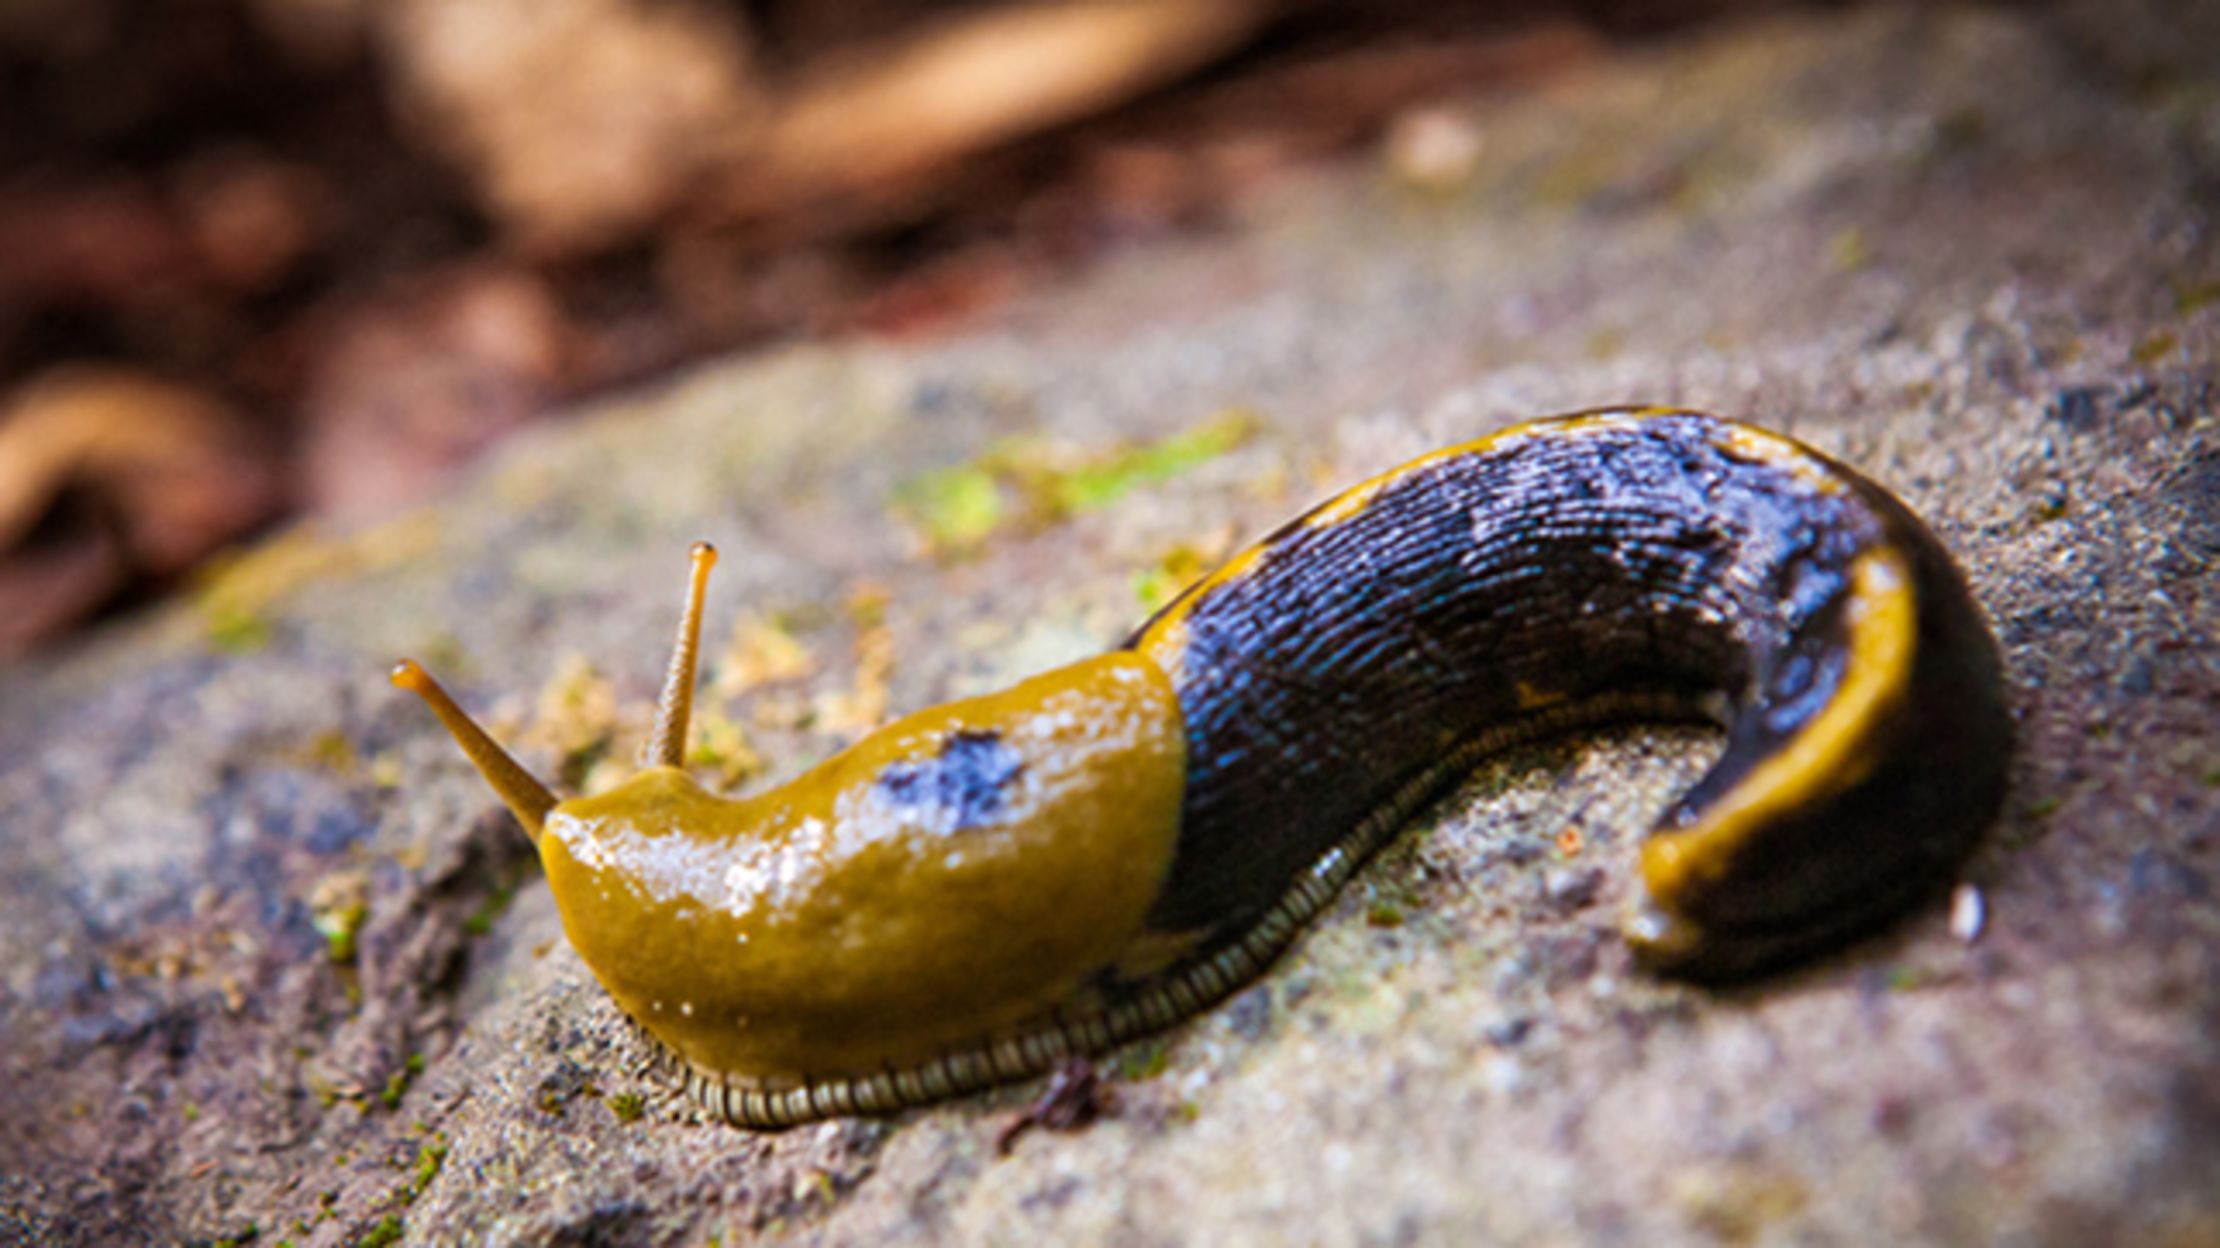 What are some interesting facts about slugs?